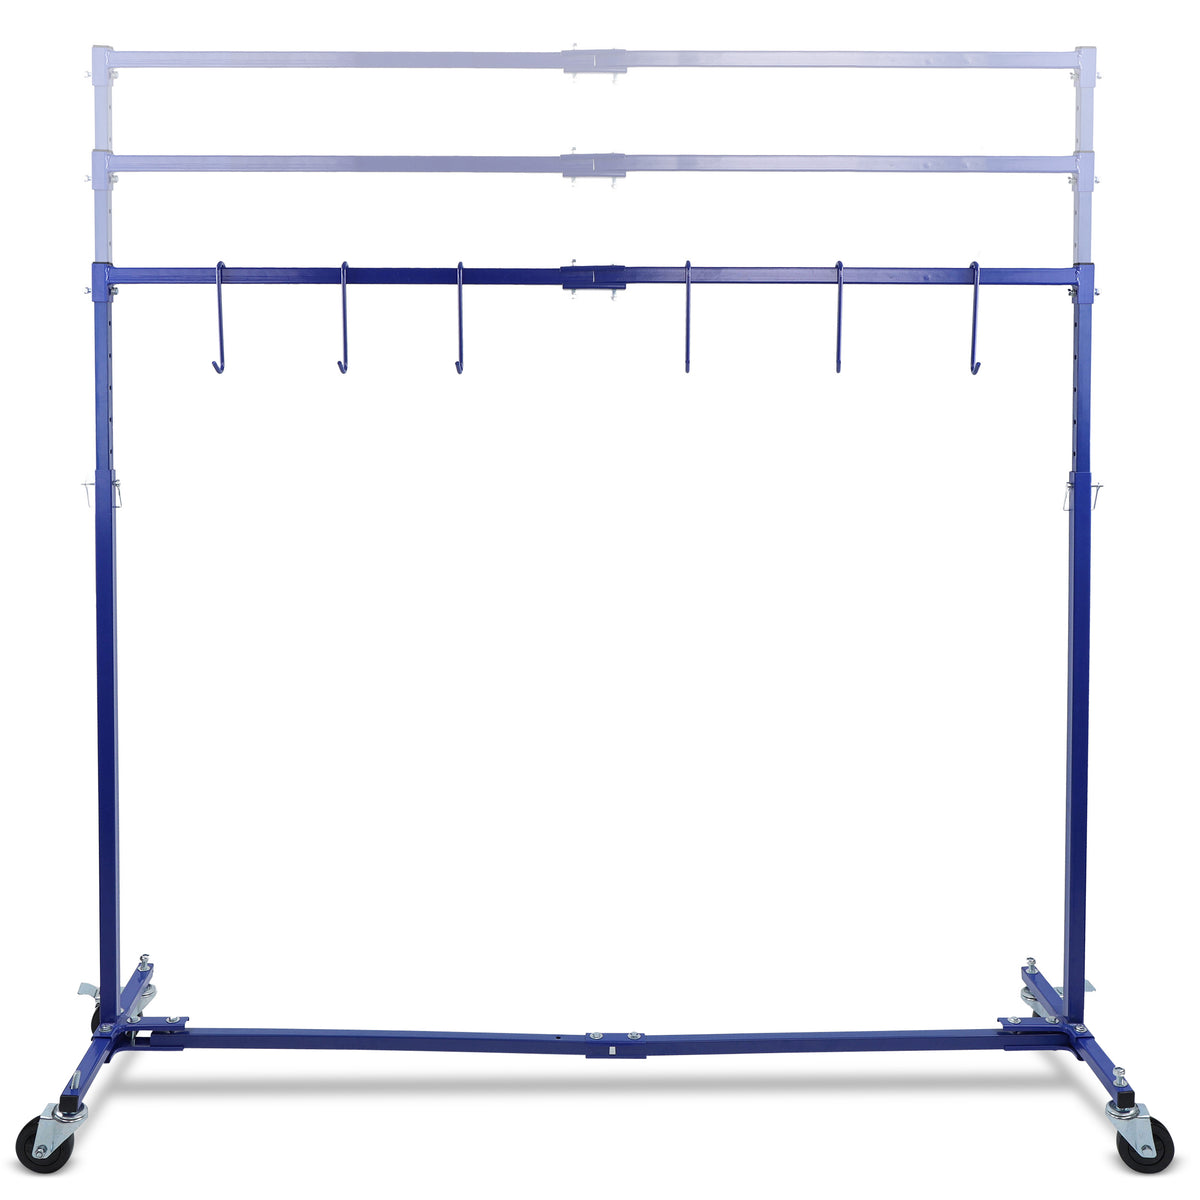 Adjustable 7 Foot Paint Hanger - Extendable 50-70-Inch Painting Rack